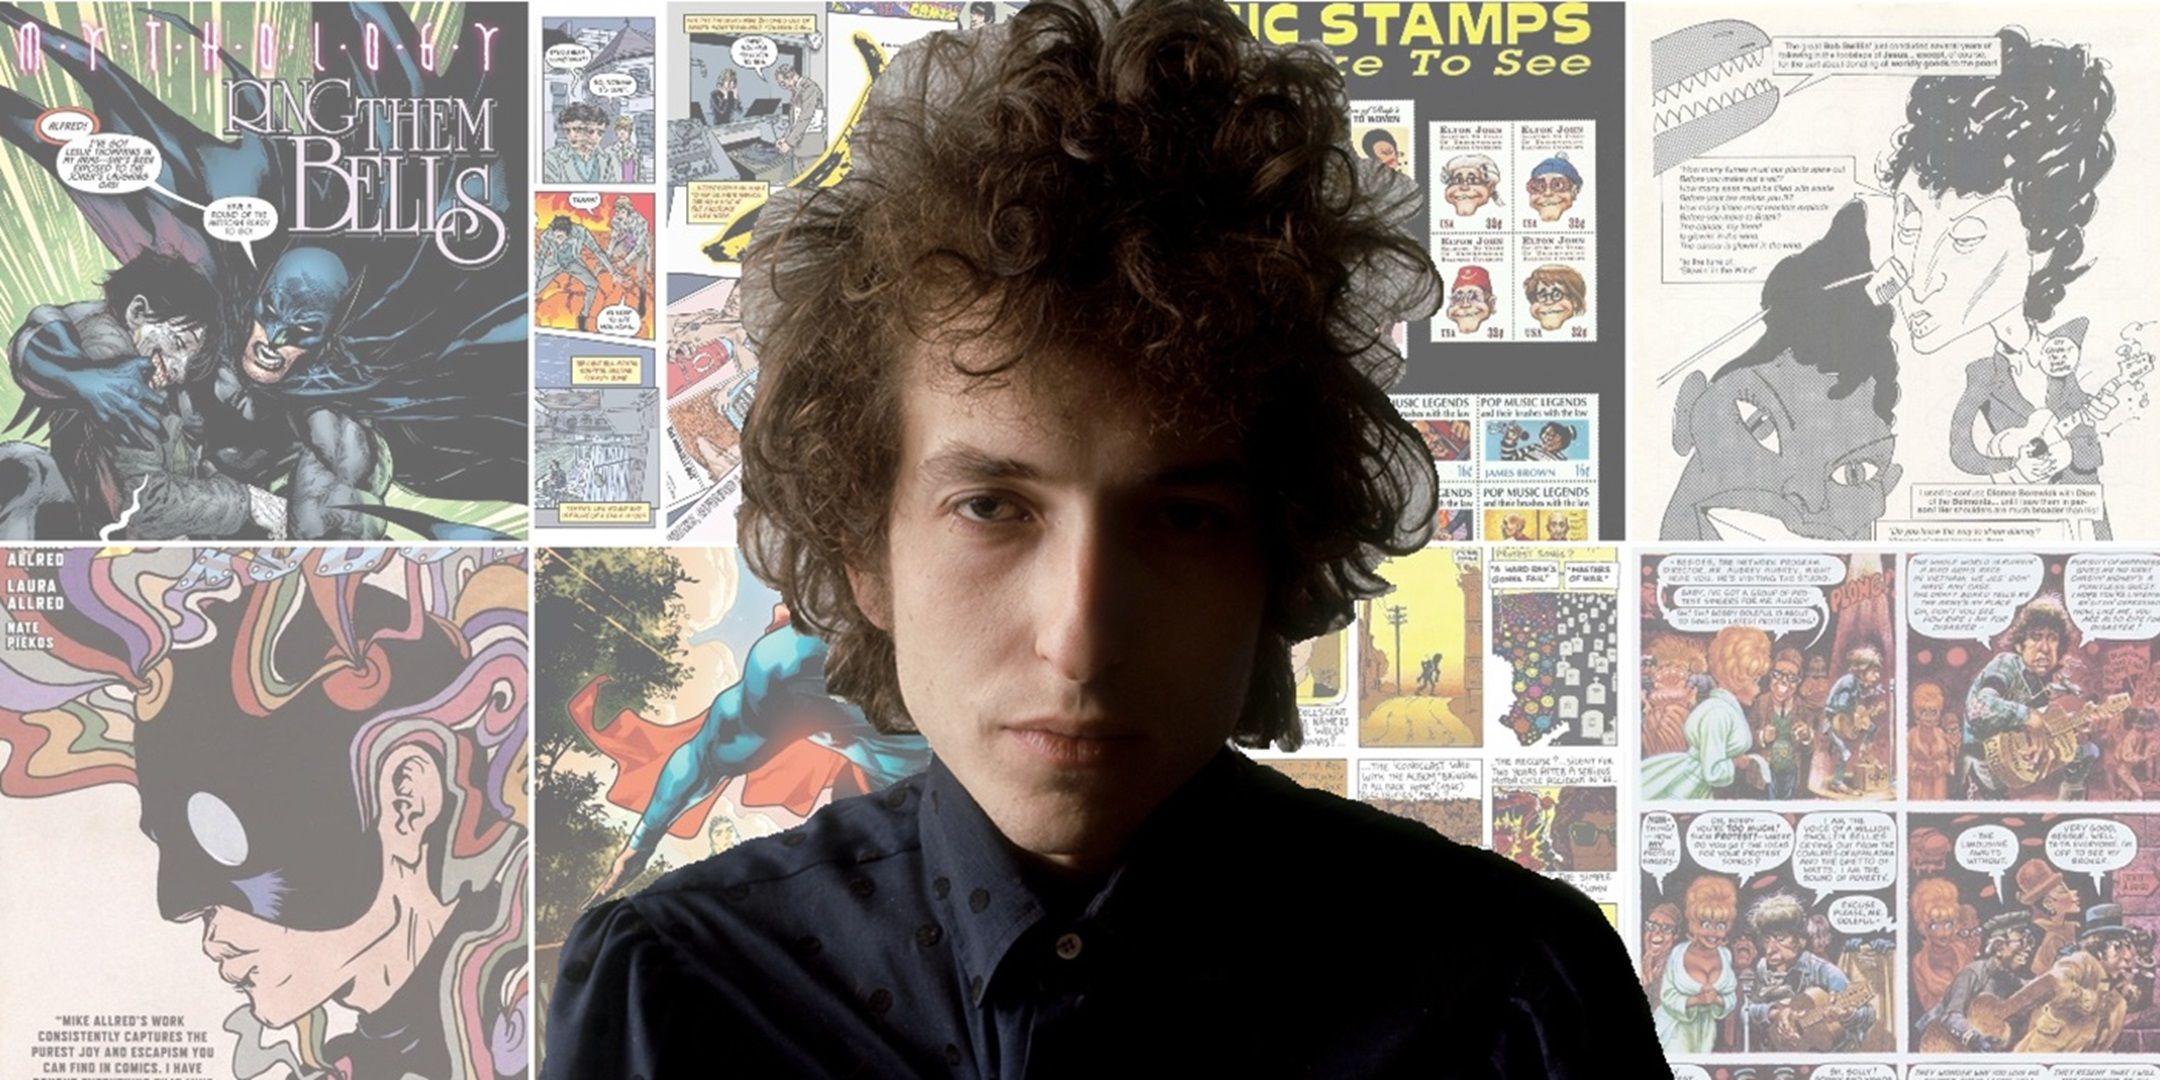 Bob Dylan in front of a number of comic book references